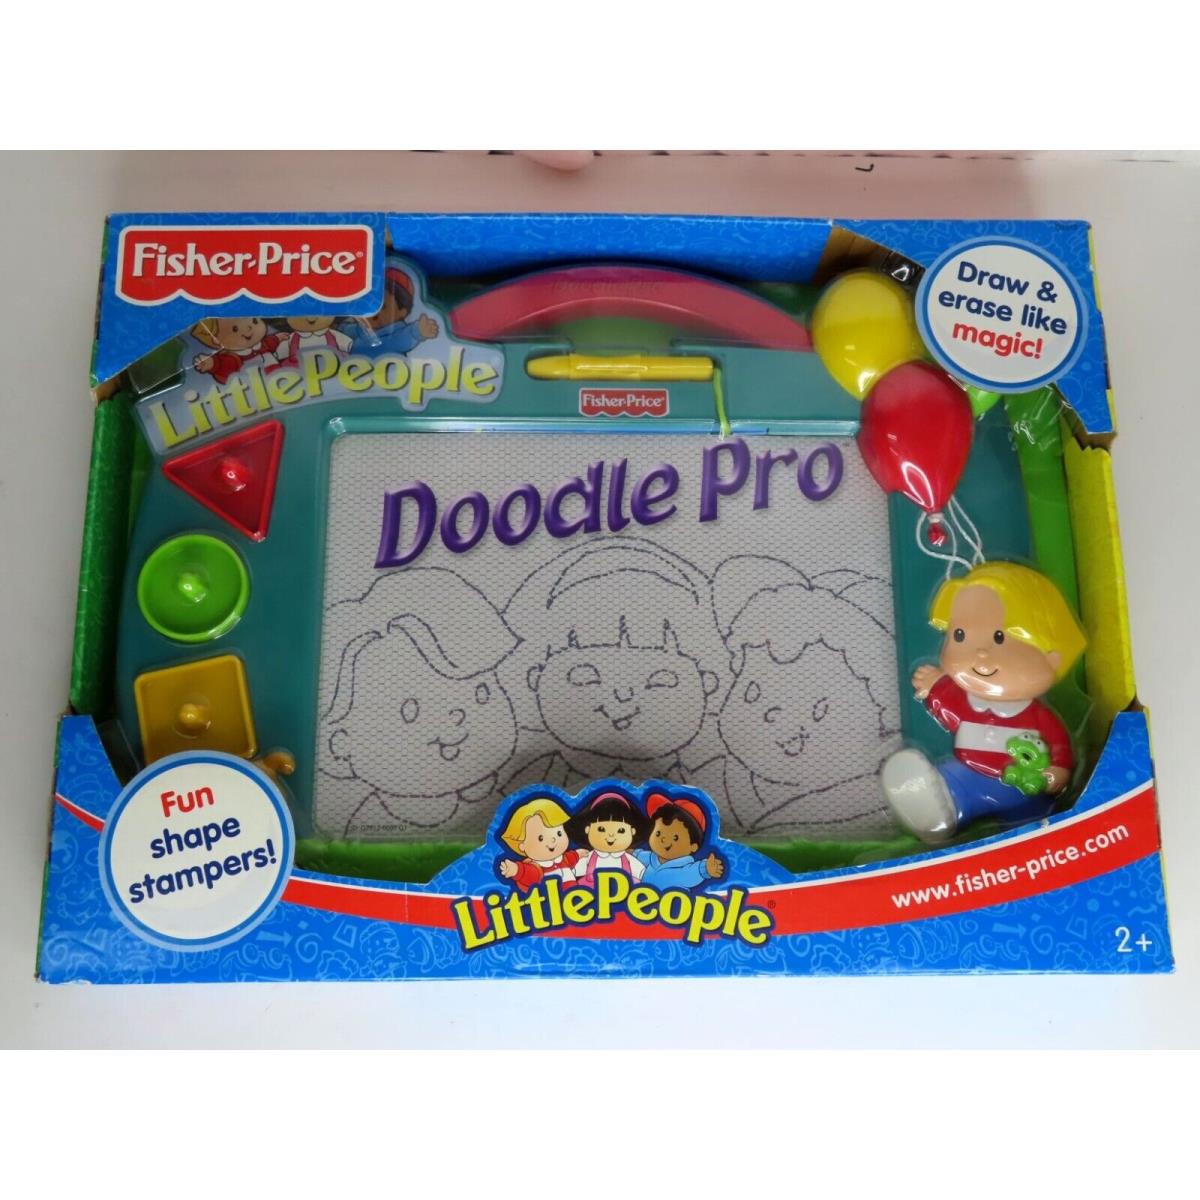 Fisher-price Little People Doodle Pro Magnet Drawing Toy in Package